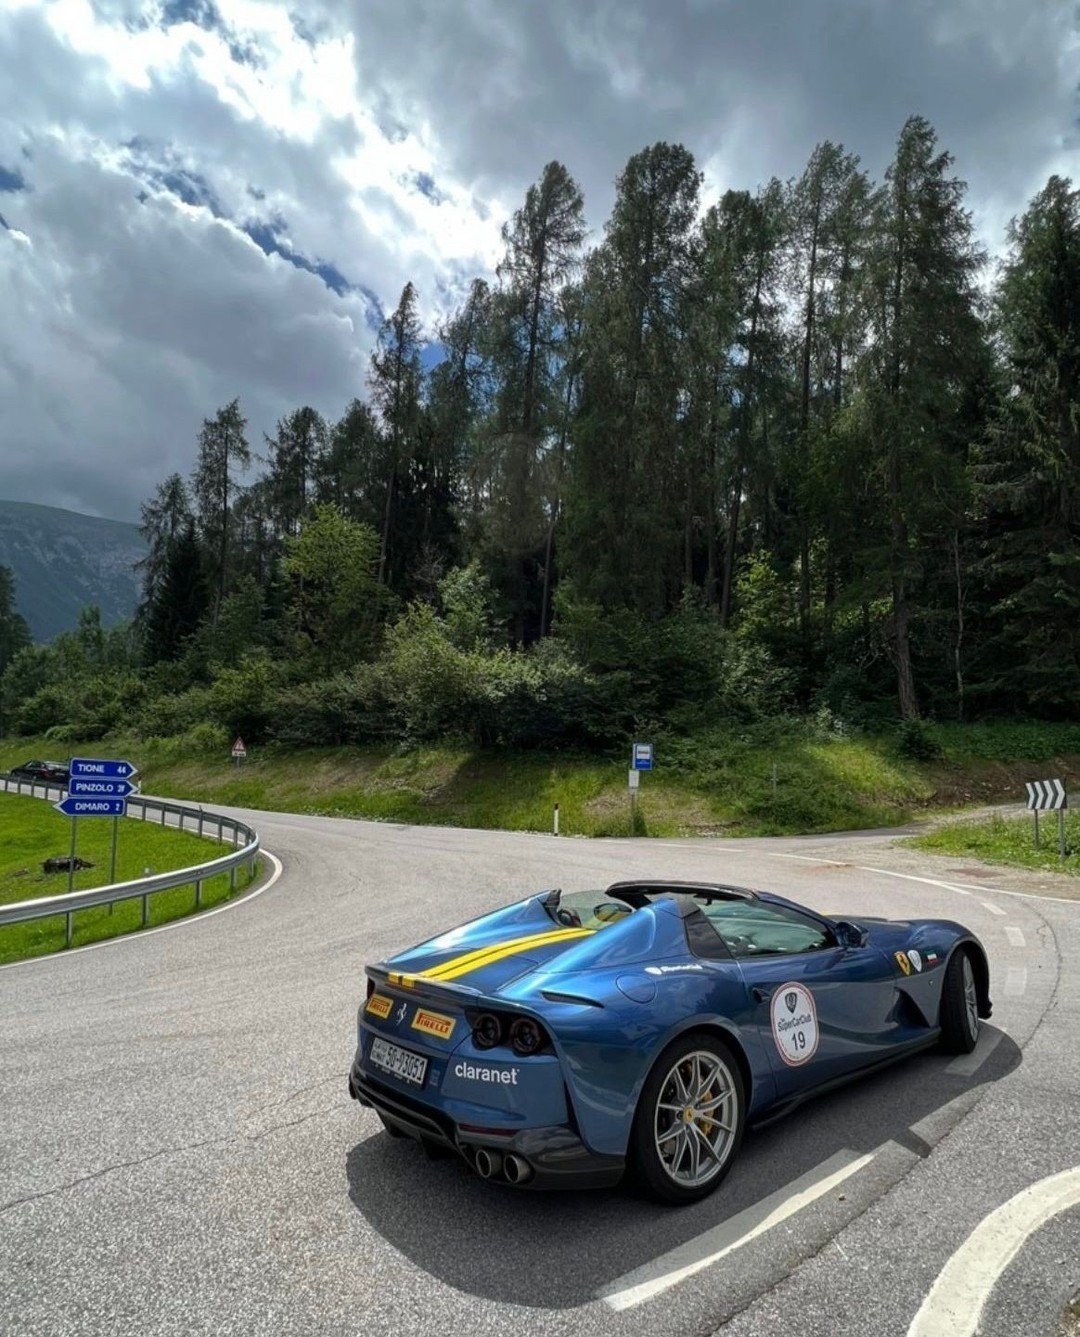 Spectacular mountain views on the 2022 Supercar Run 😍⁠
⁠
Get in touch to join our 2024 Giro d'Italia event 👇⁠
⁠
📩 info@thesupercarclub.com⁠
⁠
⁠
#supercardriver #supercardriversclub #supercardrivers #supercardriverclub #itswhitenoise #carsofinstagr